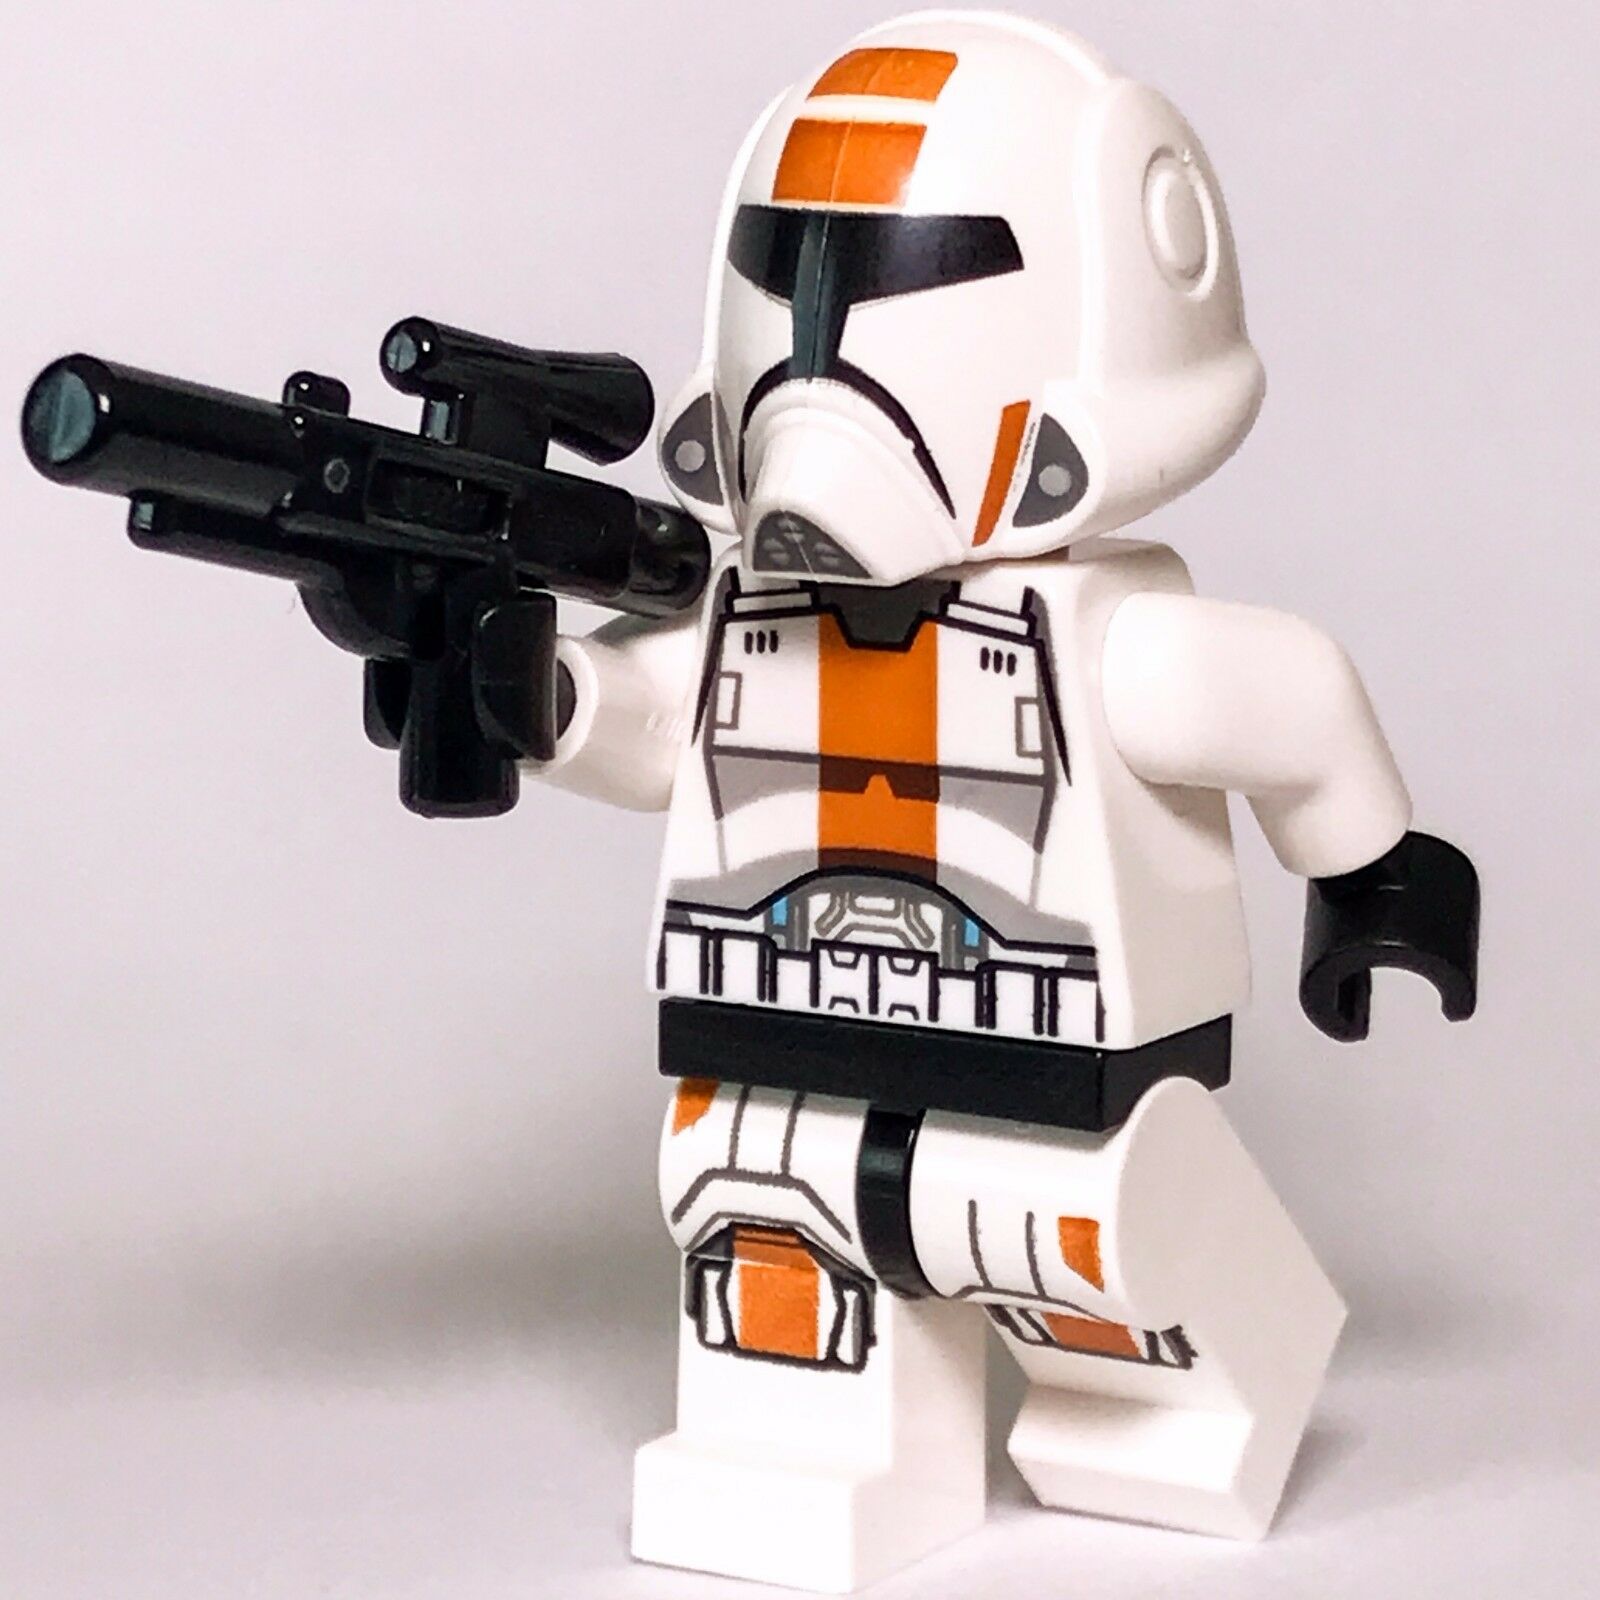 New Star Wars LEGO Old Republic Trooper Minifigure with face 2 75001 Genuine - Bricks & Figures